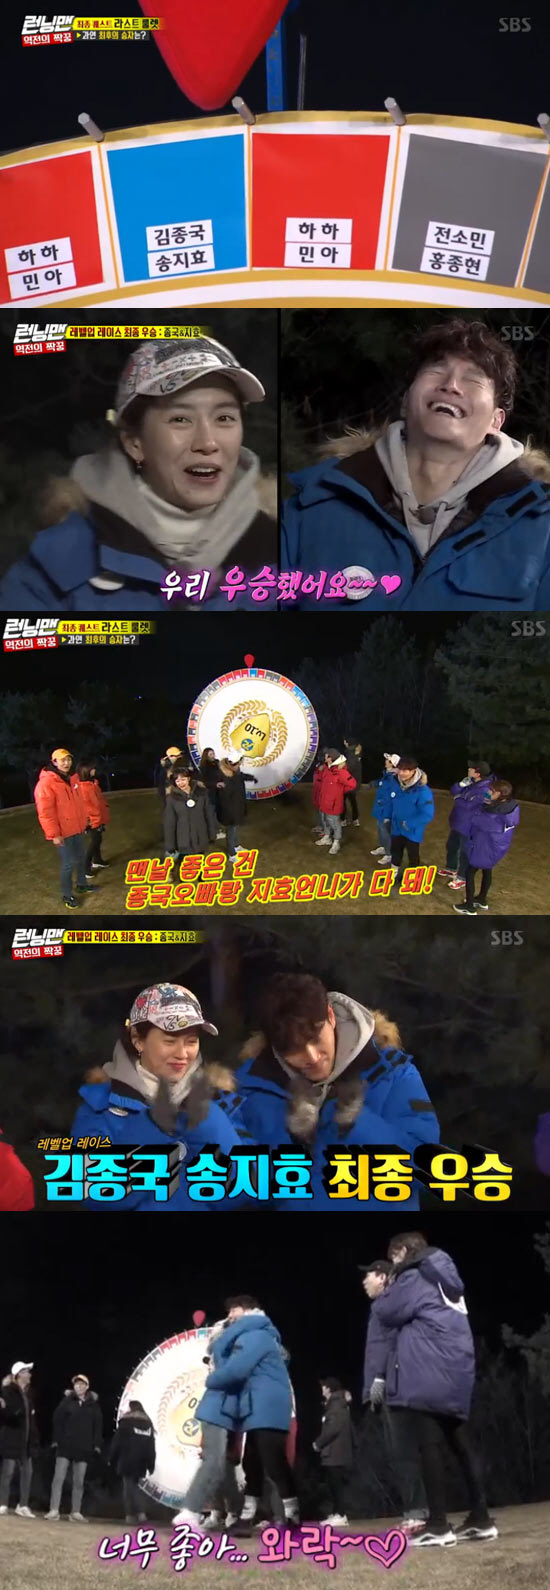 Kim Jong-kook Song Ji-hyo Ace couple became final reversal winner of Level Up ProjectOn SBS Running Man broadcasted on the 27th, Lee Yoo-ri, Jung Yu-mi, Hong Jong-Hyun, Seungri, and AOA Jimin X Minah appeared and ran a pair race with the members.On this day, six people from the entertainment industry, who will decorate the US of the Level Up Project held for the past three weeks, played a big role.Jung Yu-mi, the first Running Man appearance, turned into a shy girl mode when she saw Yoo Jae-Suk asking for a handshake as soon as she appeared.Jung Yu-mi, who confessed to being a long-time fan, revealed the success of the successful virtue, saying, I cried on the wedding day of Yoo Jae-Suk after the Brad Pitt marriage.Lee Yoo-ri, a cute evil girl who found Running Man again in five years, made the members nervous with the passion of flame.Perfect Sculpture Man Hong Jong-Hyun caught his eye with an unexpected fuss, and entertainment Cheetki victory led to the atmosphere with unchanging gesture.Also, AOAs Jimin X Minah laughed with an uncanny four-dimensional charm.In particular, Minah saw Yoo Jae-Suk and laughed at his agencys vice-principal, saying, Please look at it because it is the same company.From the process of setting up a pair of guests, the guests gave off a passion.The members who were anxious to be pairs of high-level Jeon So-min, Haha, and Jung Yu-mi threw themselves from the water-twisting to the third row.Lee Yoo-ri, who has been watering Jimin coolly, has wiped his face with a sorry heart, especially Lee Yoo-ri, who has always shown his ability to do the dirty work of the villain.Eventually, at the end of the twists and turns, Yoo Jae-suk Jung Yu-mi, Lee Yoo-ri Lee Kwang-soo, Jeon So-min Hong Jong-Hyun, Seungri Ji Suk-jin, Kim Jong-kook Song Ji-hyo, Haha Minah, Yang Se-chan Jimin performed a paired mission ...Lee Yoo-ris axiousness continued in Game afterwards.Lee Yoo-ri continued his blind pursuit with Lee Kwang-soo in a straw suit on a mission that caught up with his opponents speed on the ice and popped a balloon.At the end, Ace couple Kim Jong-kook Song Ji-hyo took the first place in the game after losing power.Lee Yoo-ri ran in the Level-up Chair King game, which takes up the chair.As he was hundreds of meters uphill, Lee Yoo-ri sank down as if determined to do something and pulled the insole out of his shoes.Lee Yoo-ri said, I can run better if I take this out. He pulled a fairly high insole from his shoes.Lee Kwang-soo looked surprised and said, I ran well with such a high insole.Lee Yoo-ri, who took out the insole, played a big role in pity, breaking the bracelets of other couples and taking away chairs.On that day, Kim Jong-kook Song Ji-hyo couple became a couple mode for the members to push; the two were teased by members from their first standing side by side.Kim Jong-kook in black clothes and Song Ji-hyo in a yellow outer were filled with metaphors such as Kimbap, Danmuji, sidewalk blocks and central line.Since then, Yang Se-chan has lost his game in the water baptism, and Song Ji-hyo and Kim Jong-kook couple became pairs.The two Ace teamed up showed their existing breathing, but it was not easy to win because of the performance of the enthusiastic guests.The reverse of the reversal was followed by the name of the reverse couple mission.As the Jeon So-min Hong Jong-Hyun couple, who had filled the target level 10 from the couples formation, became the first missing couple, hope was given to the rest of the pair.The number of name tags to be attached to the roulette was decided after the Yang Se-chan Jimin couple were eliminated.The reversal happened at the last; Kim Jong-kook Song Ji-hyo won the title, even though the couple had a few name tags.Everyone was surprised when Roulettes arrow stopped in blue, the sign of the two men in between.Most alarming was the Kim Jong-kook Song Ji-hyo couples joy hug, Yoo Jae-Suk said: Didnt you guys hug now?and doubted the intention of the end-of-life Jihyo couple.The product is a blank gift certificate that can be used in the SBS corporation card. The production team expected a love line with the subtitle I wonder if they will use this card together or separately.